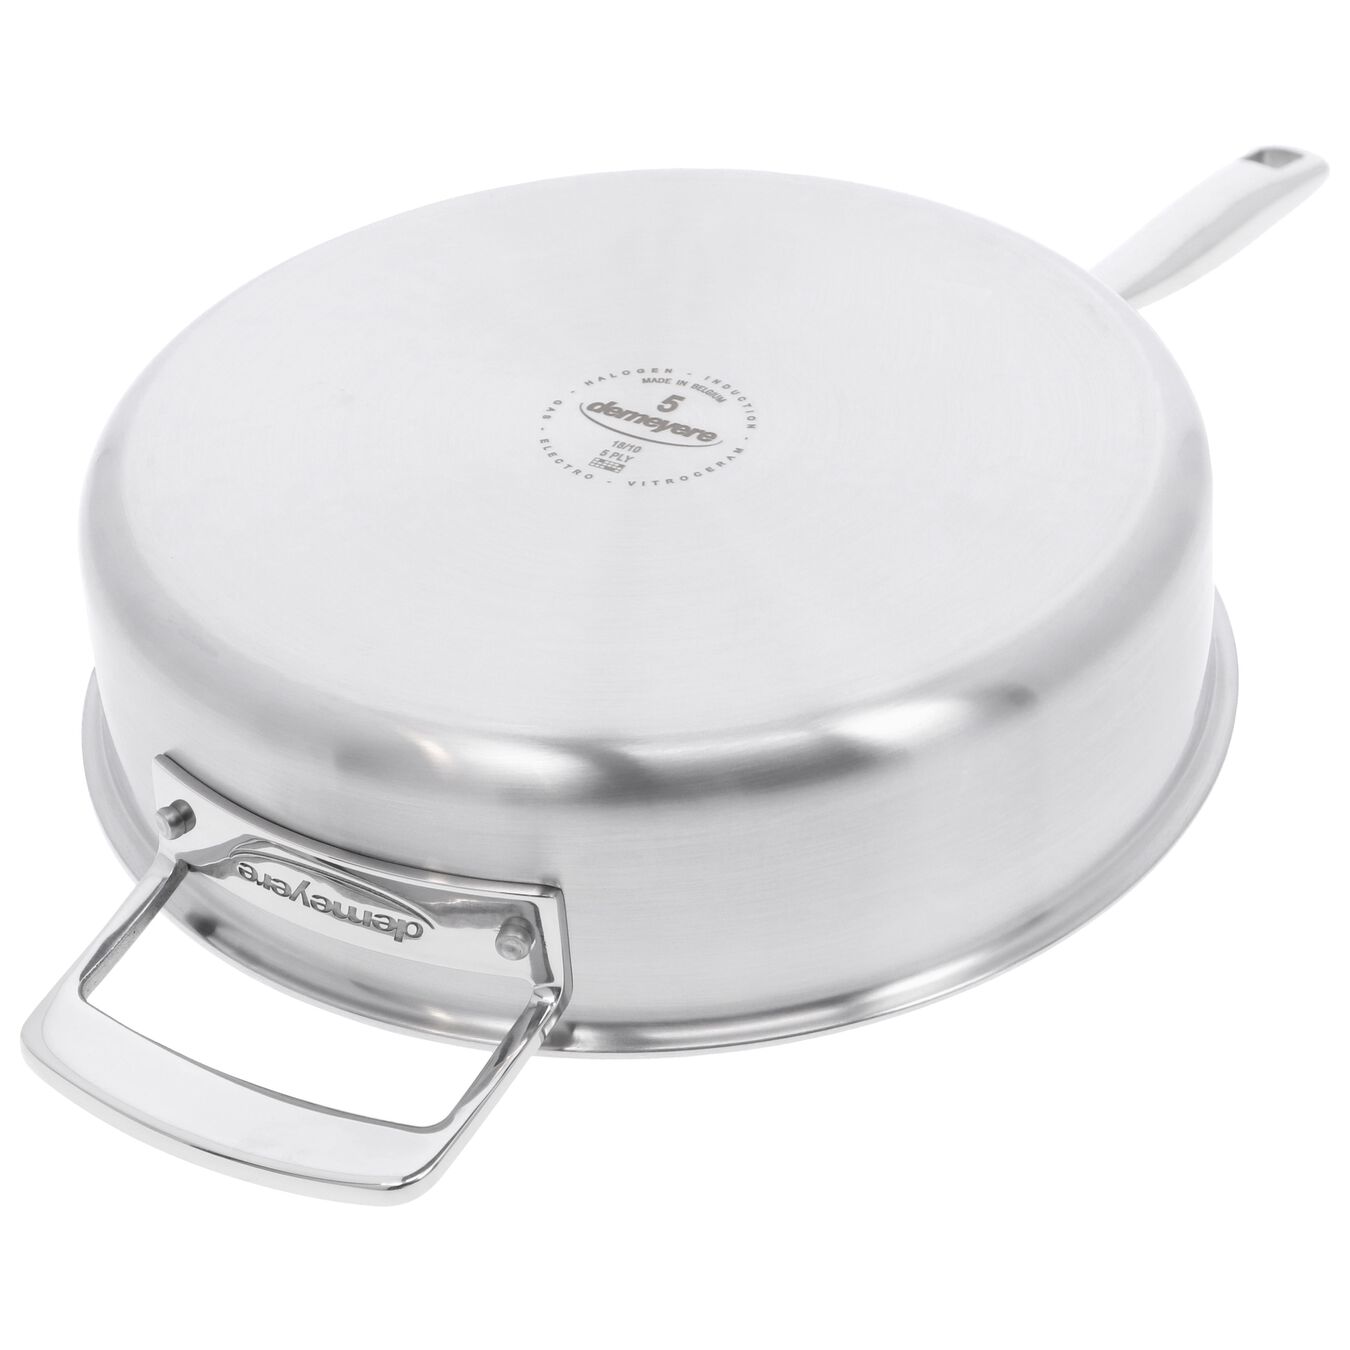 24 cm 18/10 Stainless Steel Saute pan,,large 7